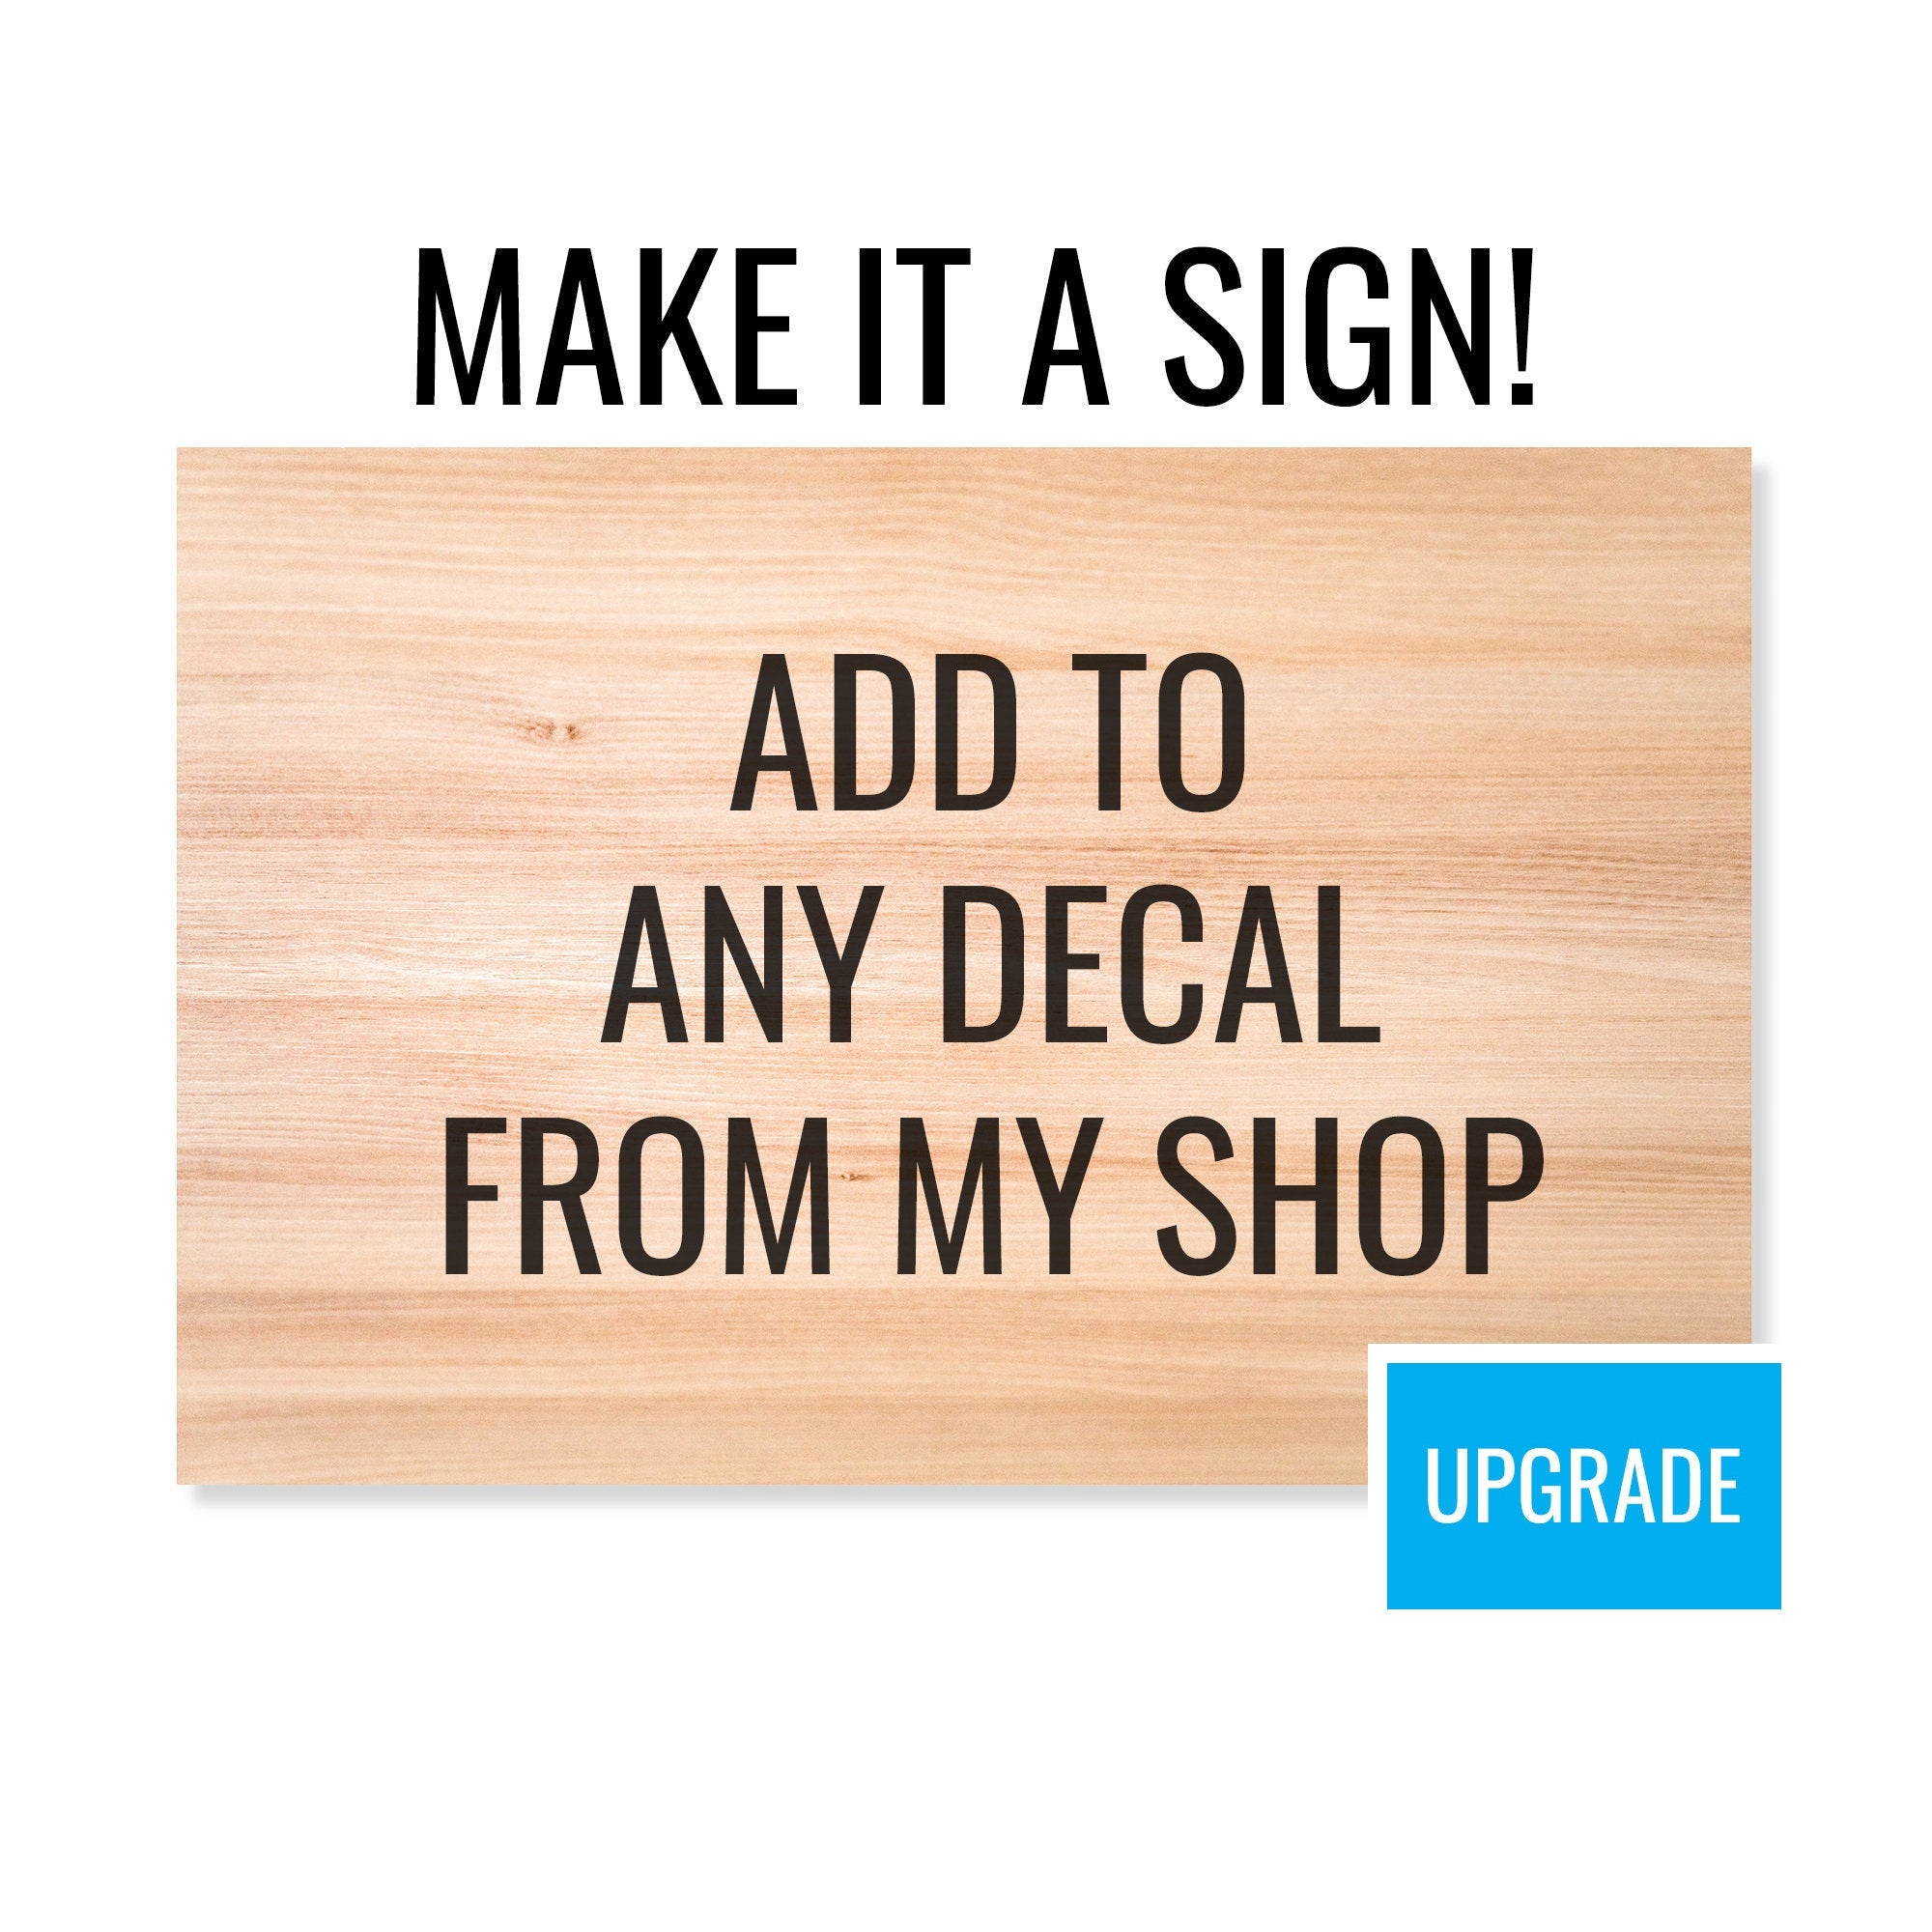 Make it a Sign Upgrade - Add to Any Decal from my Shop, Wood or Acrylic